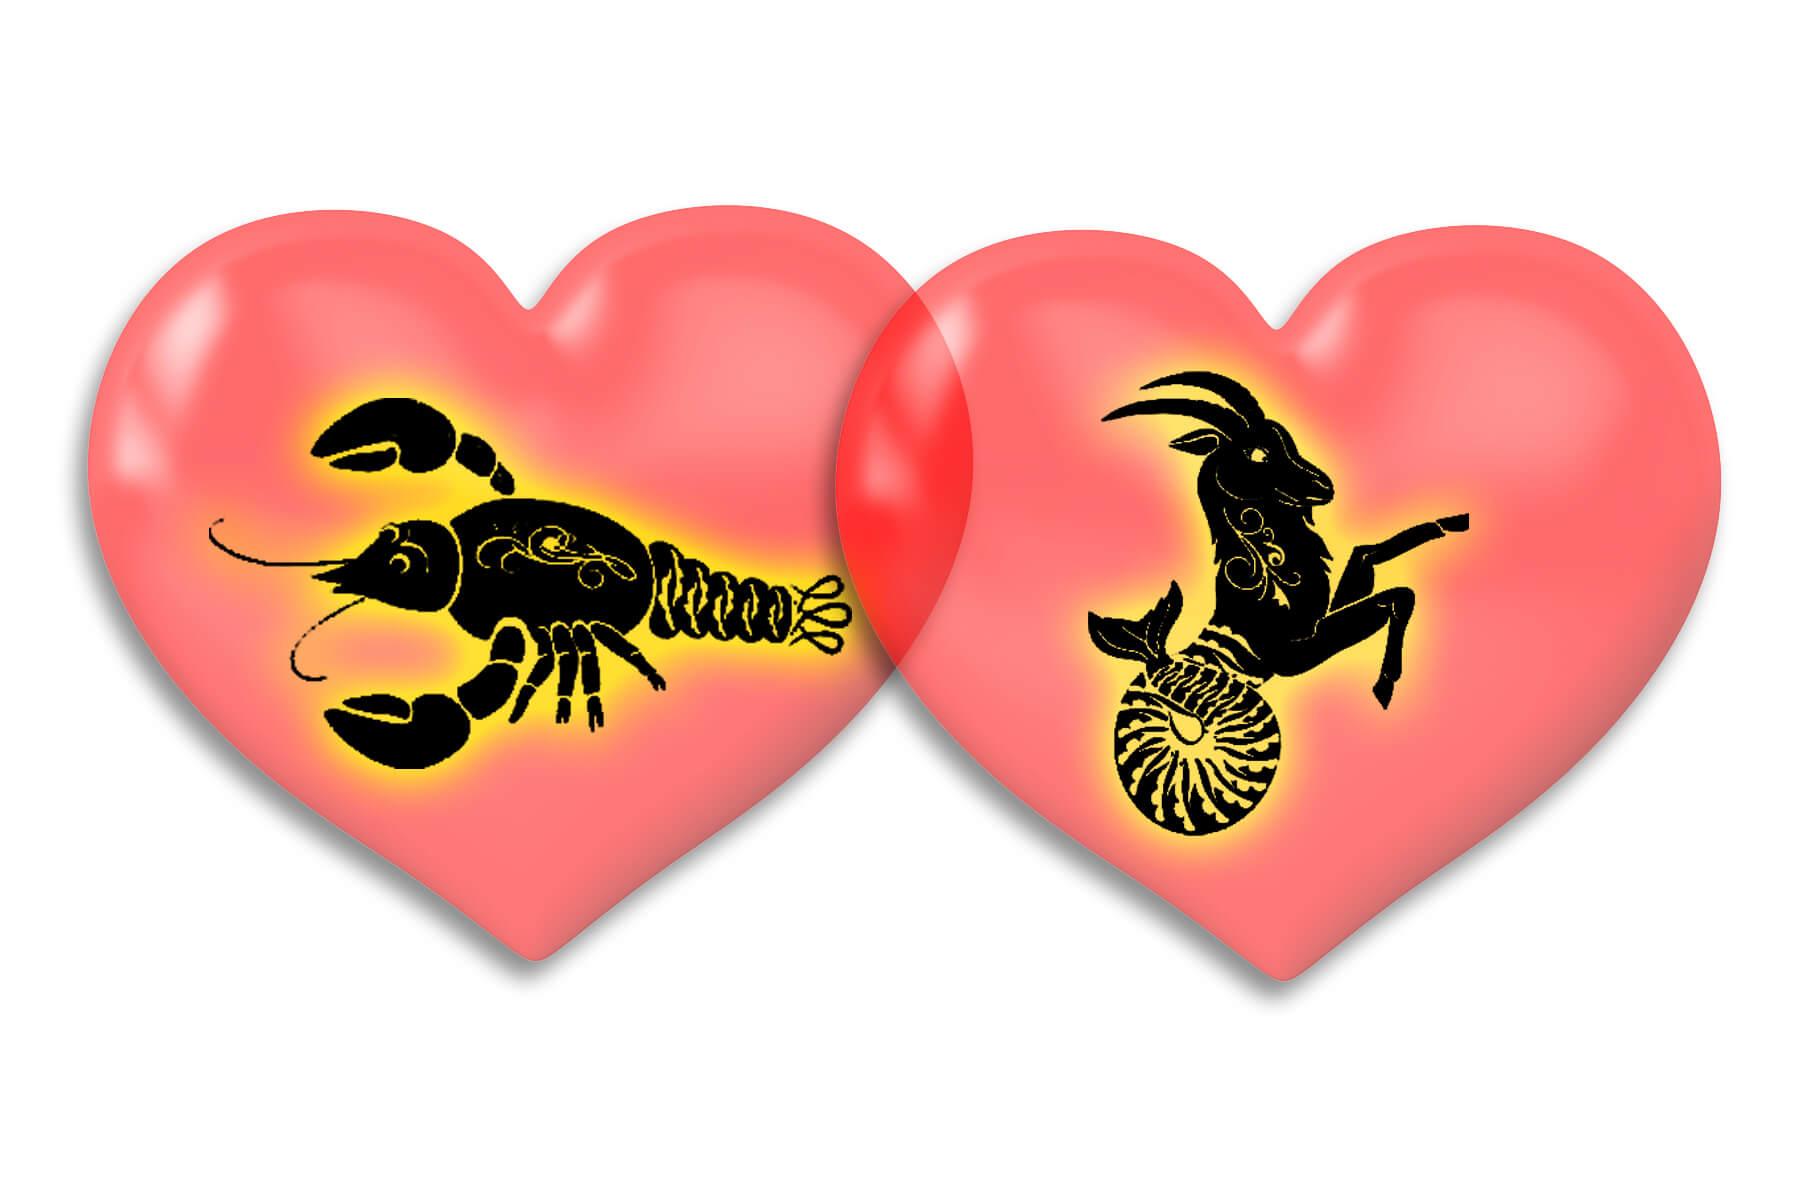 The Surprising Compatibility Of Cancer And Capricorn Revealed!